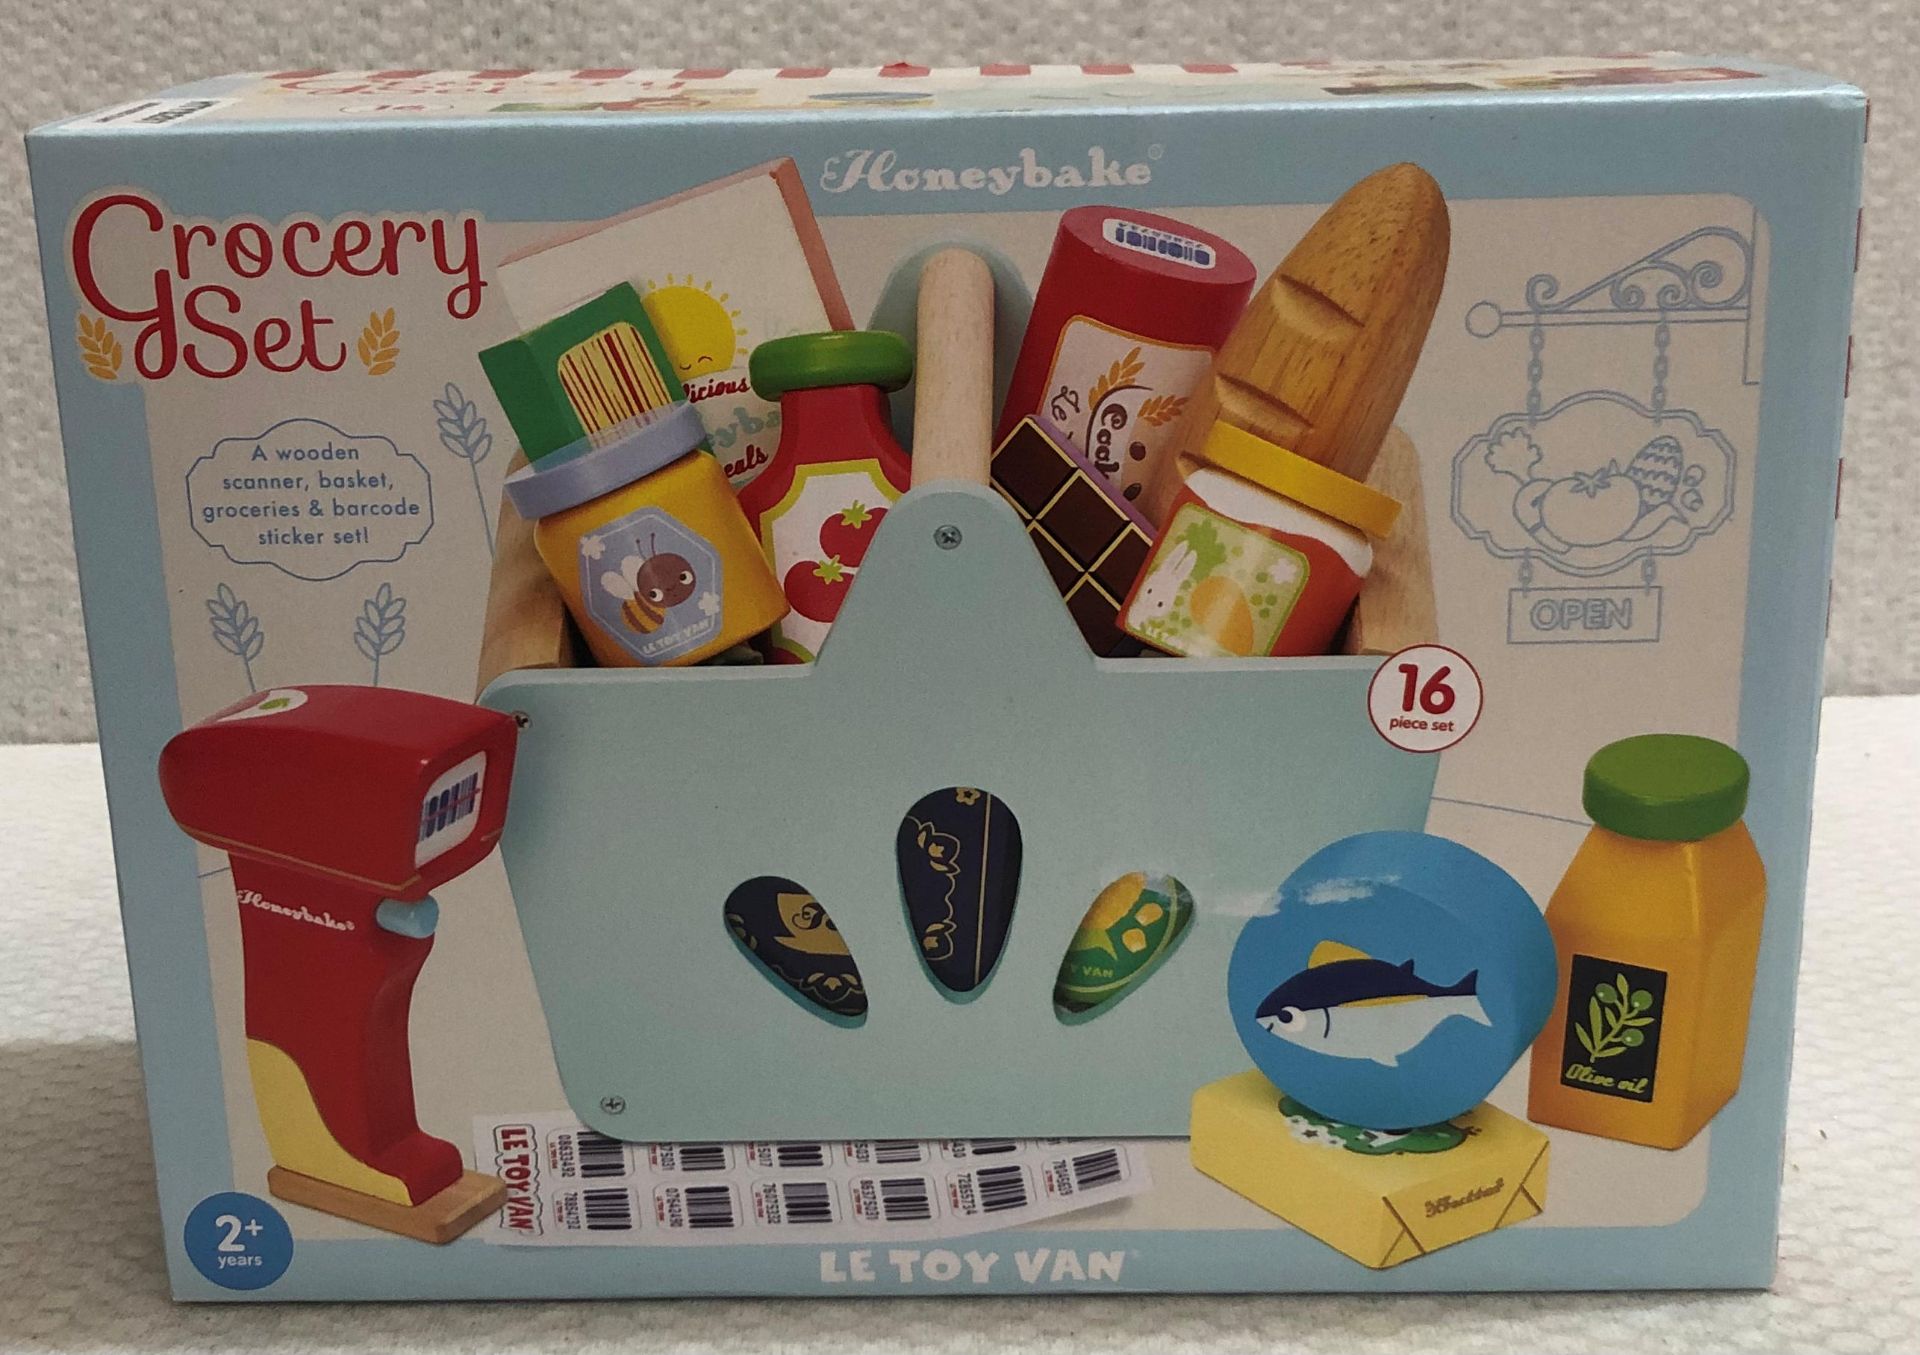 1 x Honeybake Wooden Grocery Set - New/Boxed - HTYS297 - CL987 - Location: Altrincham WA14 - RRP: £ - Image 2 of 4